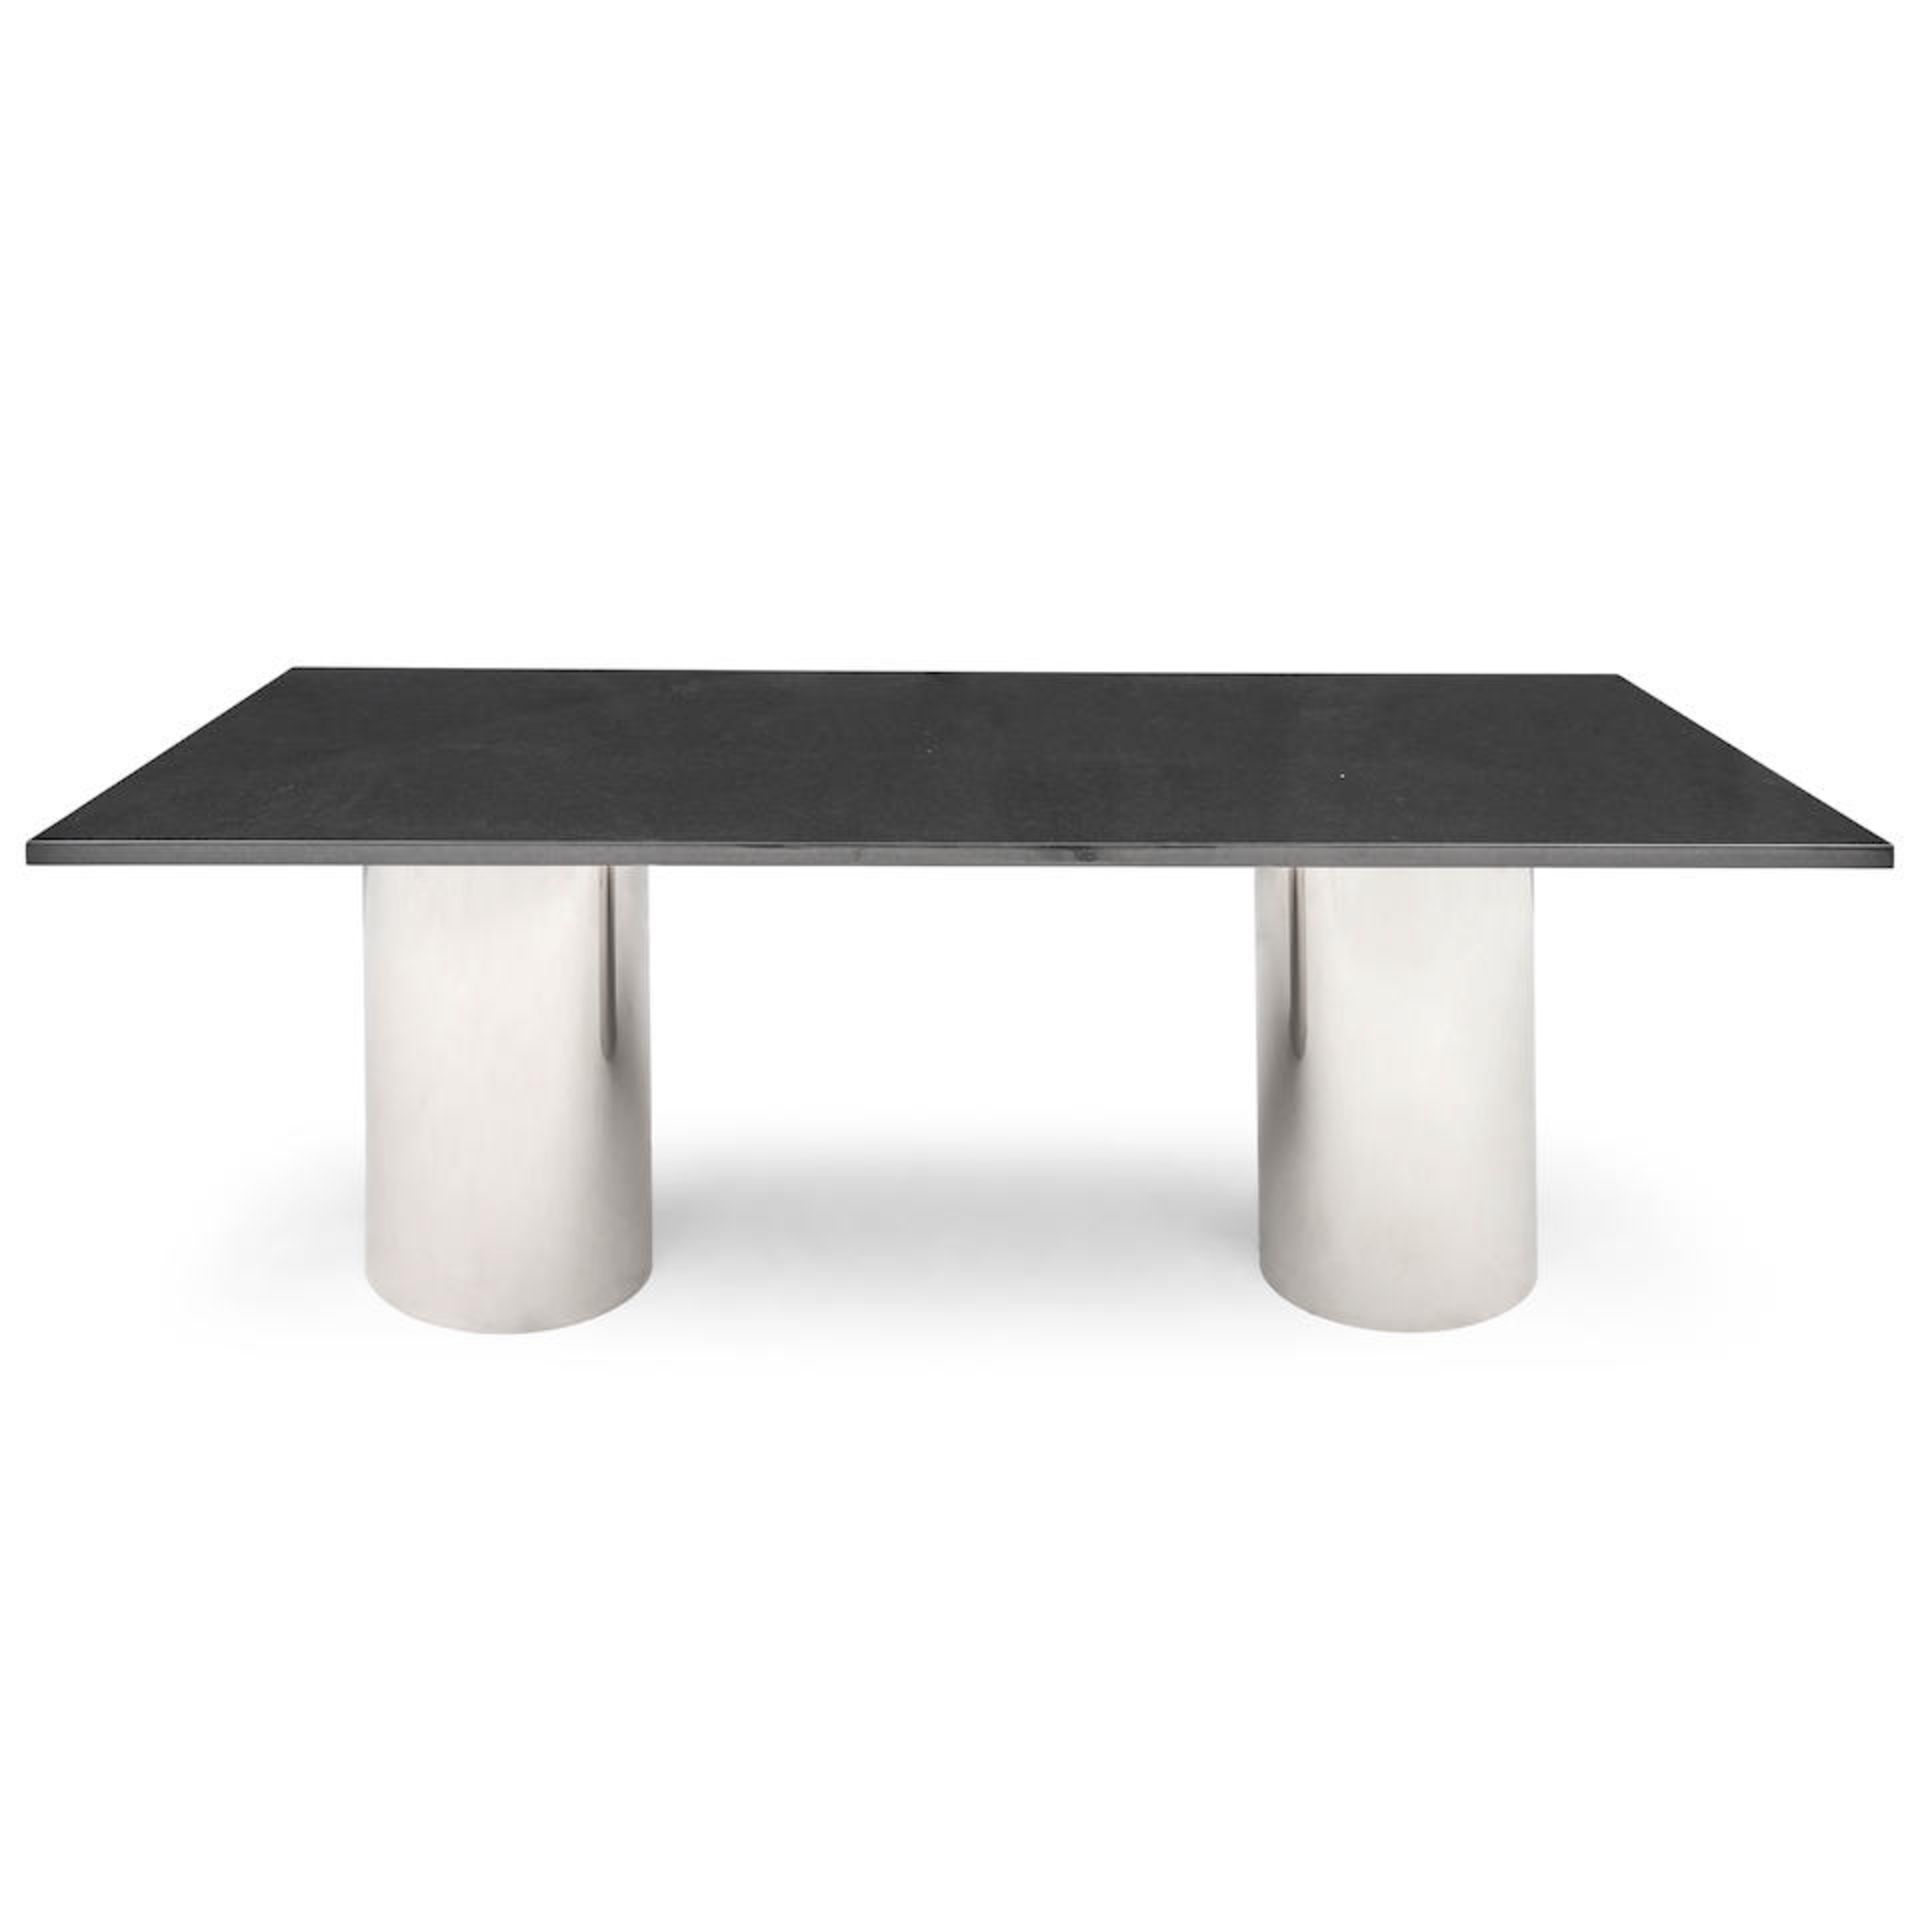 MID-CENTURY MODERN CHROME AND STONE DINING TABLE, c. 1960, black granite, steel frame with chrom...